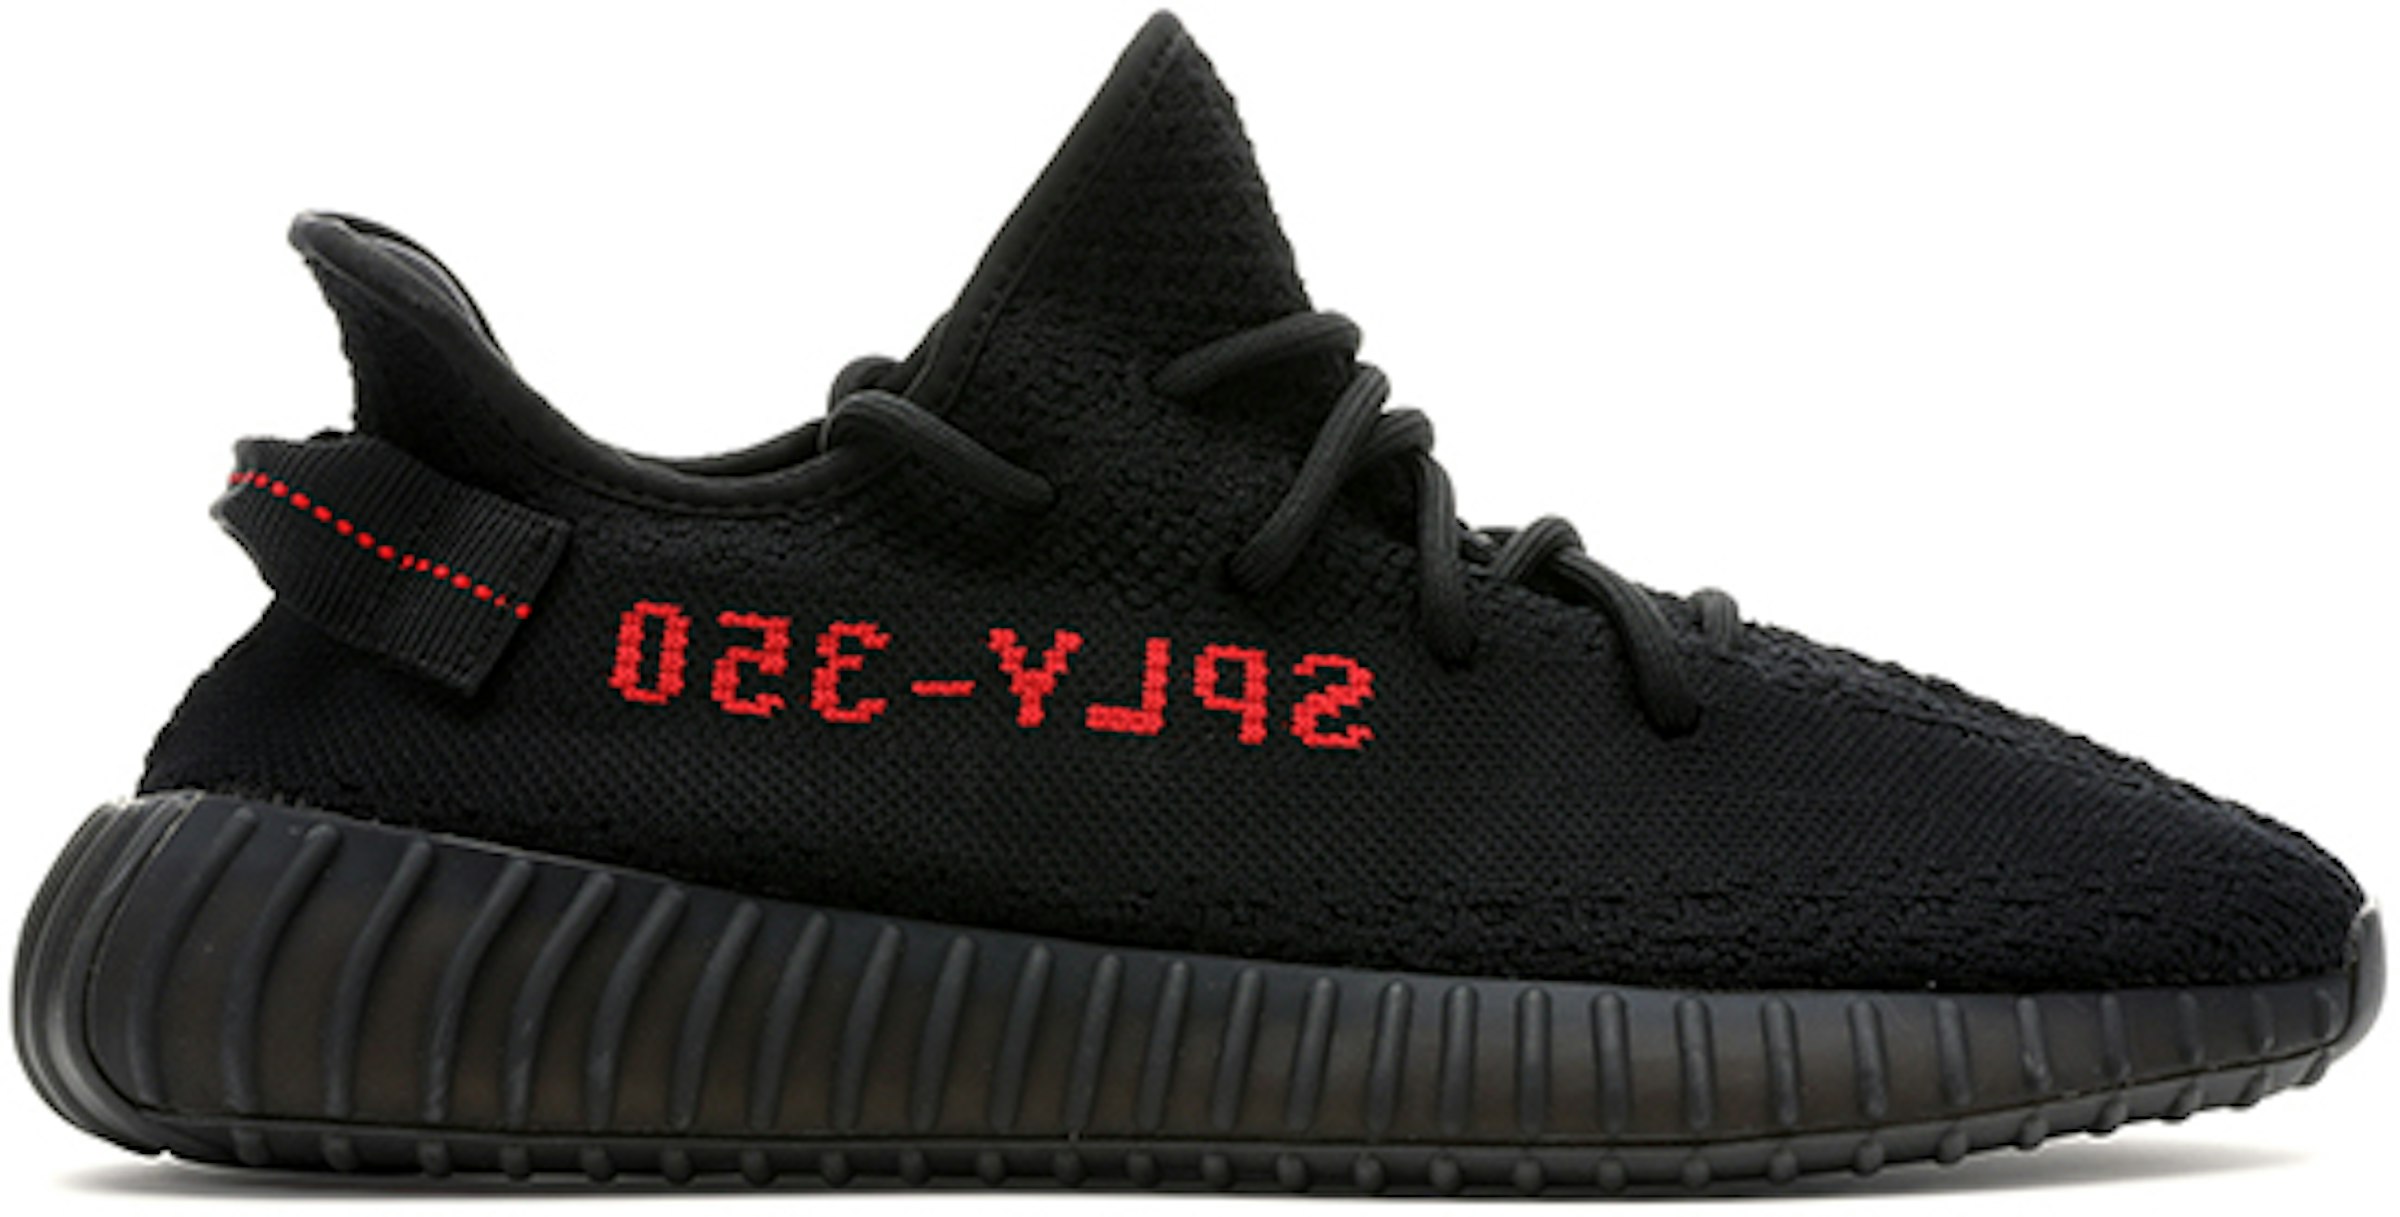 adidas Yeezy Boost 350 Black Red (2017/2020) Men's - CP9652 - US